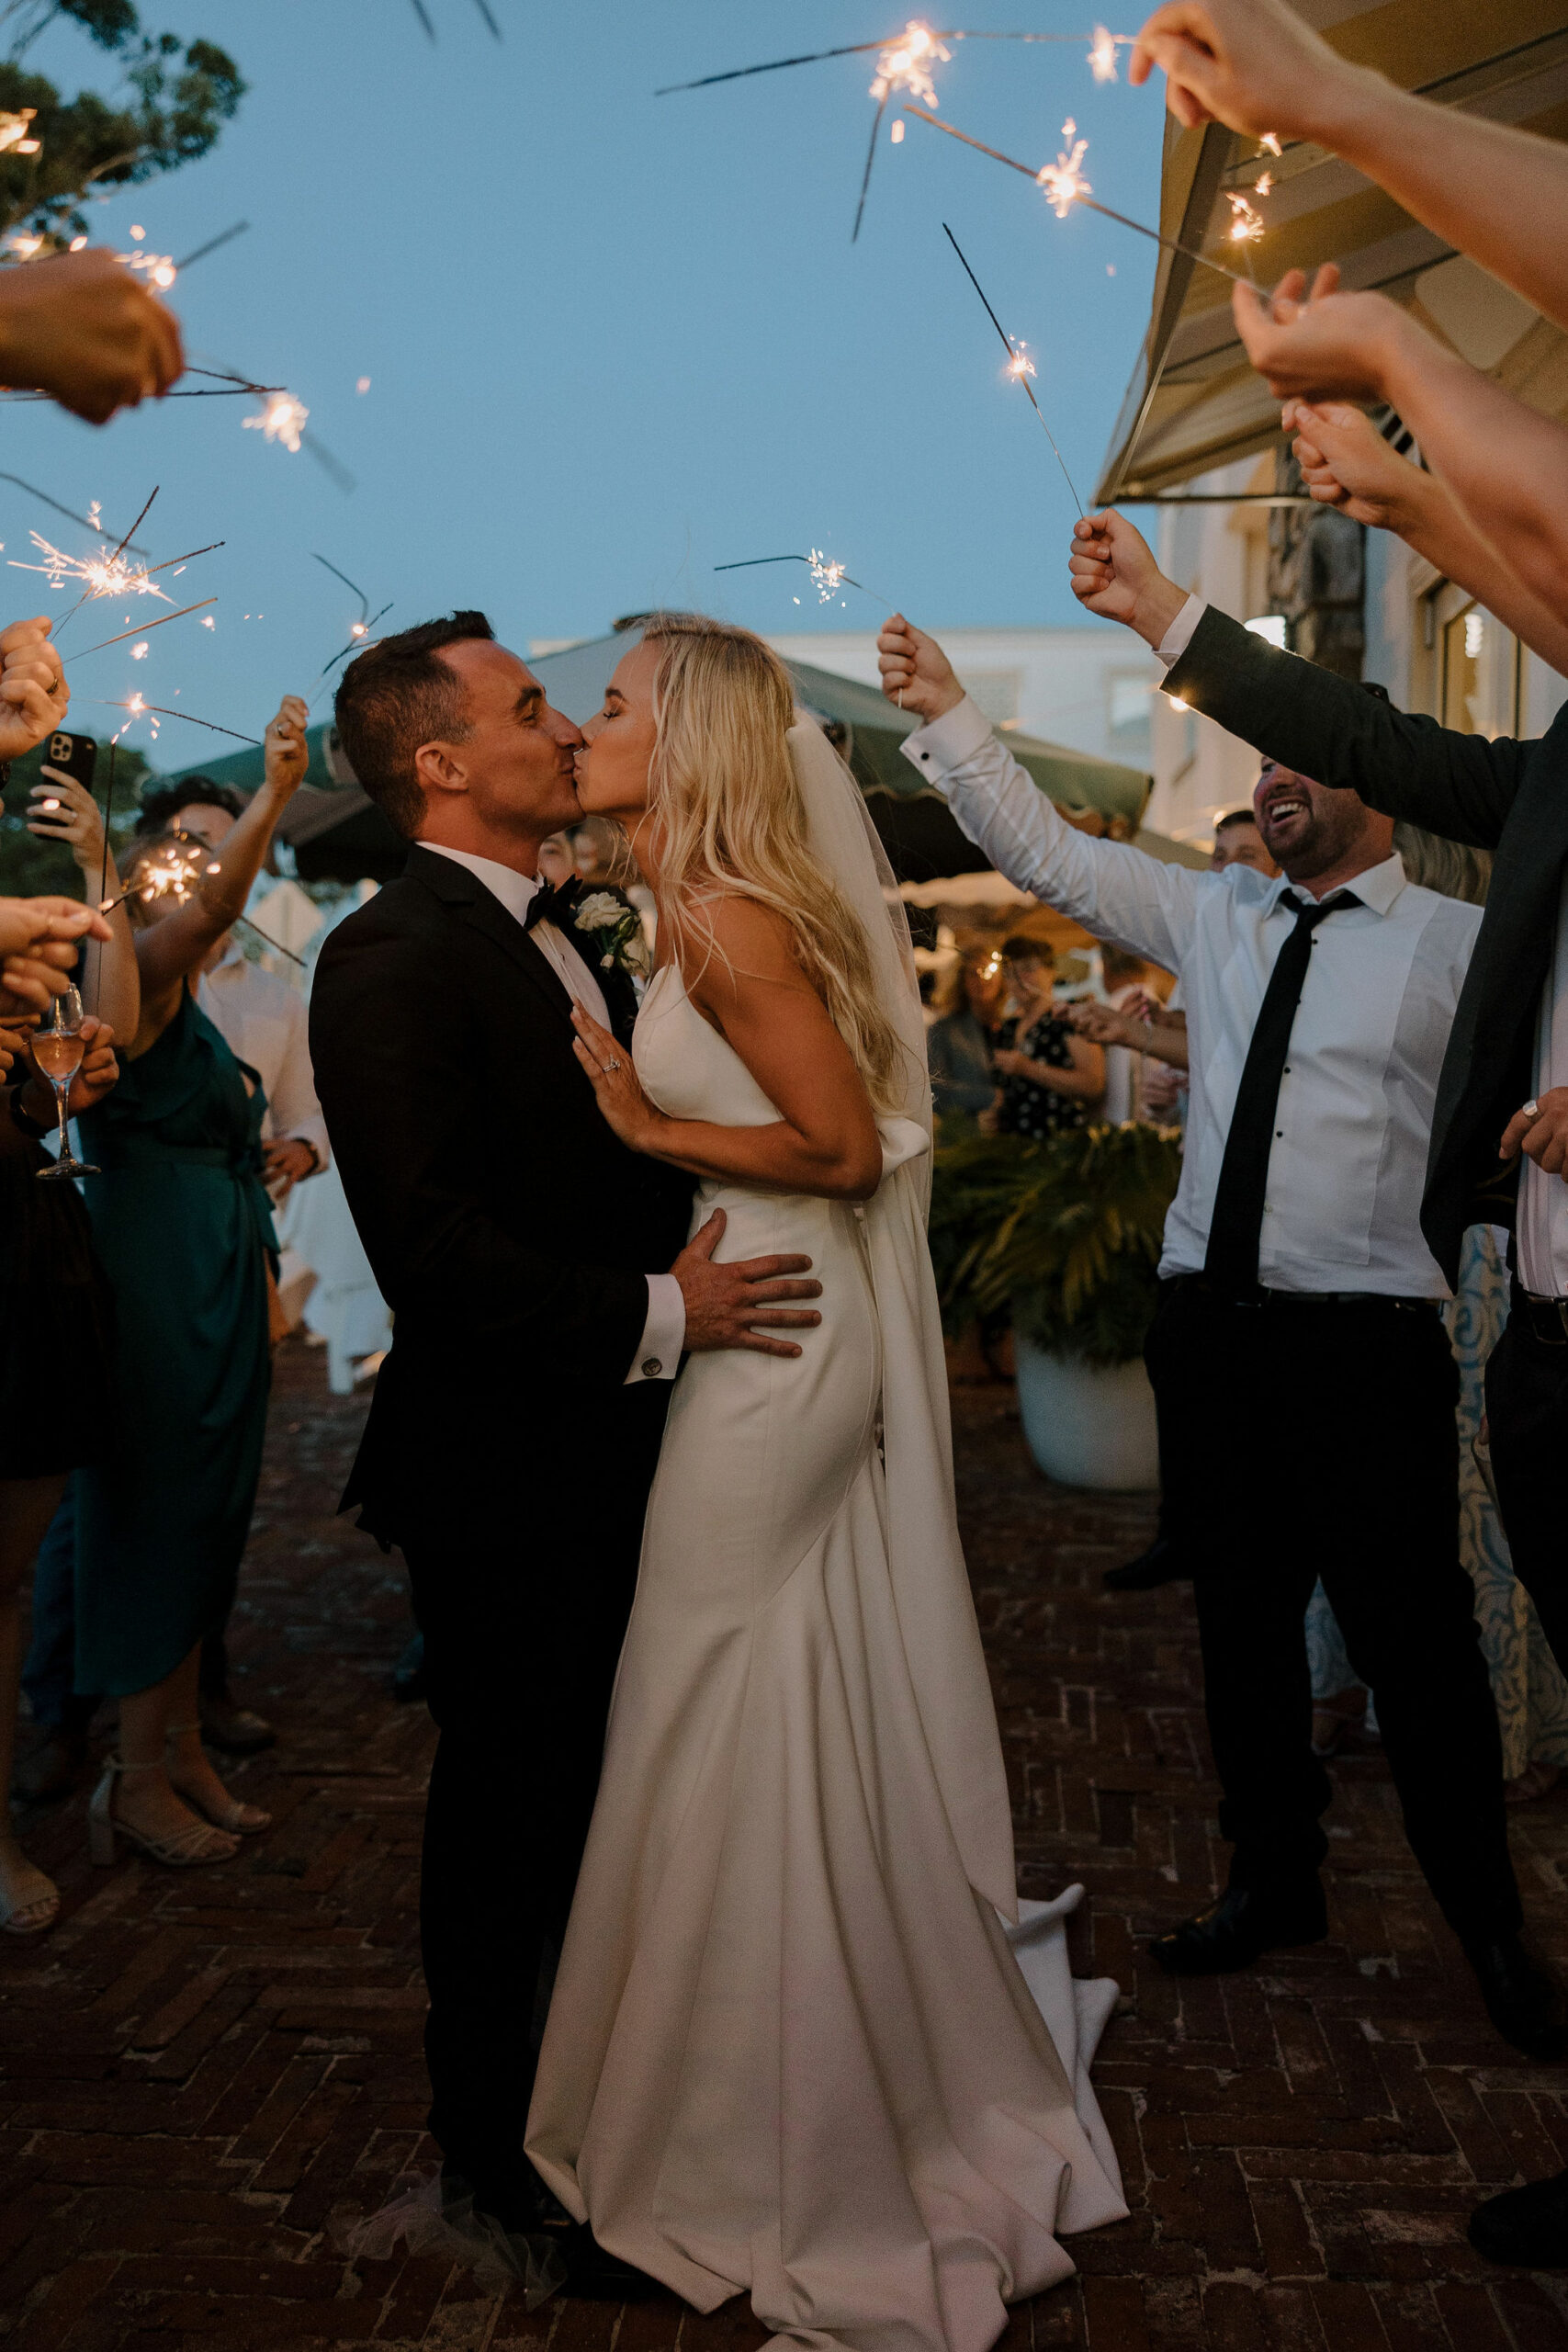 Chantal + Pierce. Real Wedding. Hunter Valley Wedding Planner Magazine. Venue: Shoal Bay. Photos by Rope and Pulley.